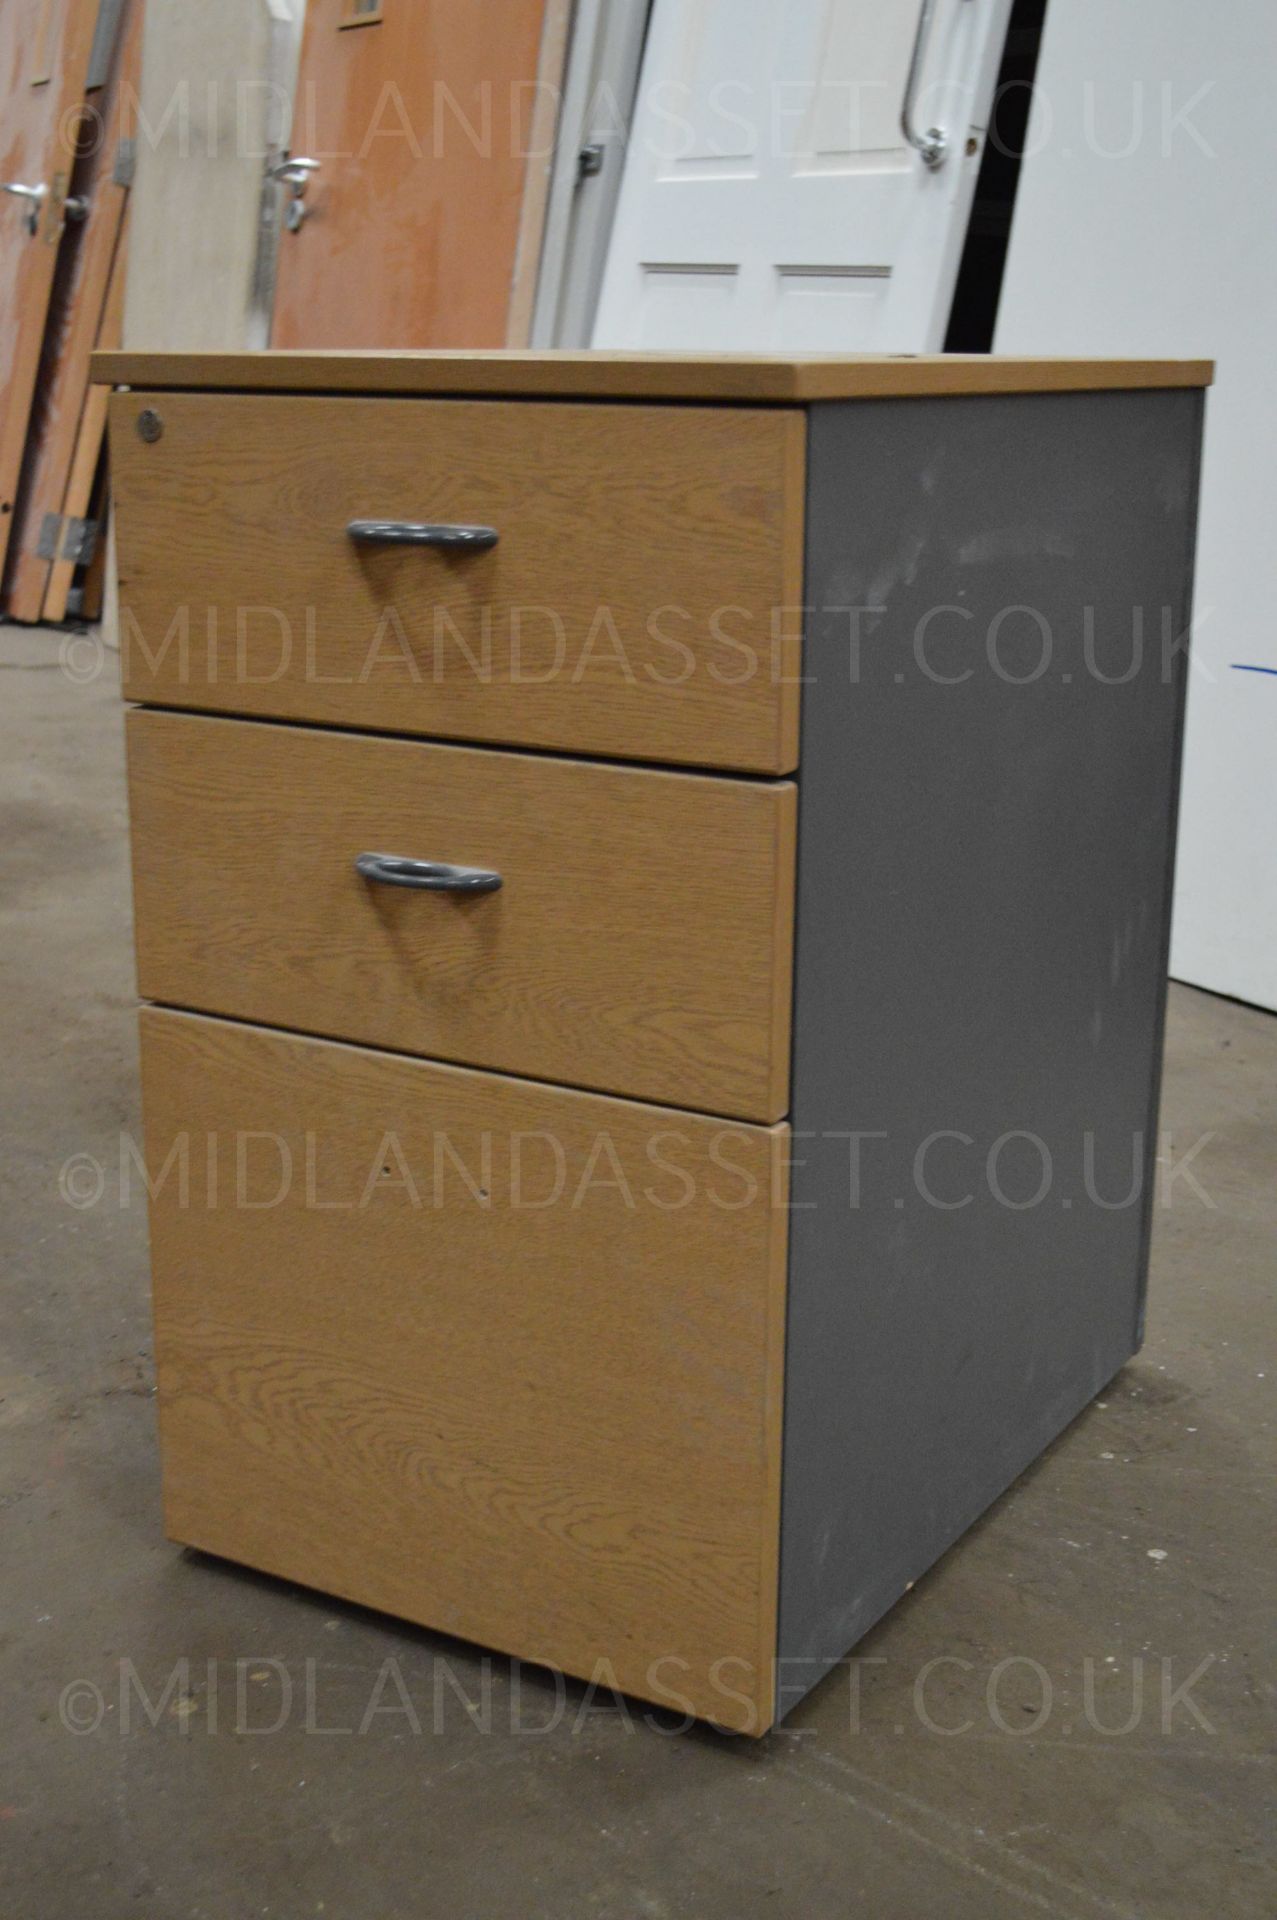 RECTANGULAR CANTILEVER DESK AND A FREE DRAW!!! - USED CONDITION (PEN MARKS ETC) OAK OFFICE DRAWERS - Image 3 of 6